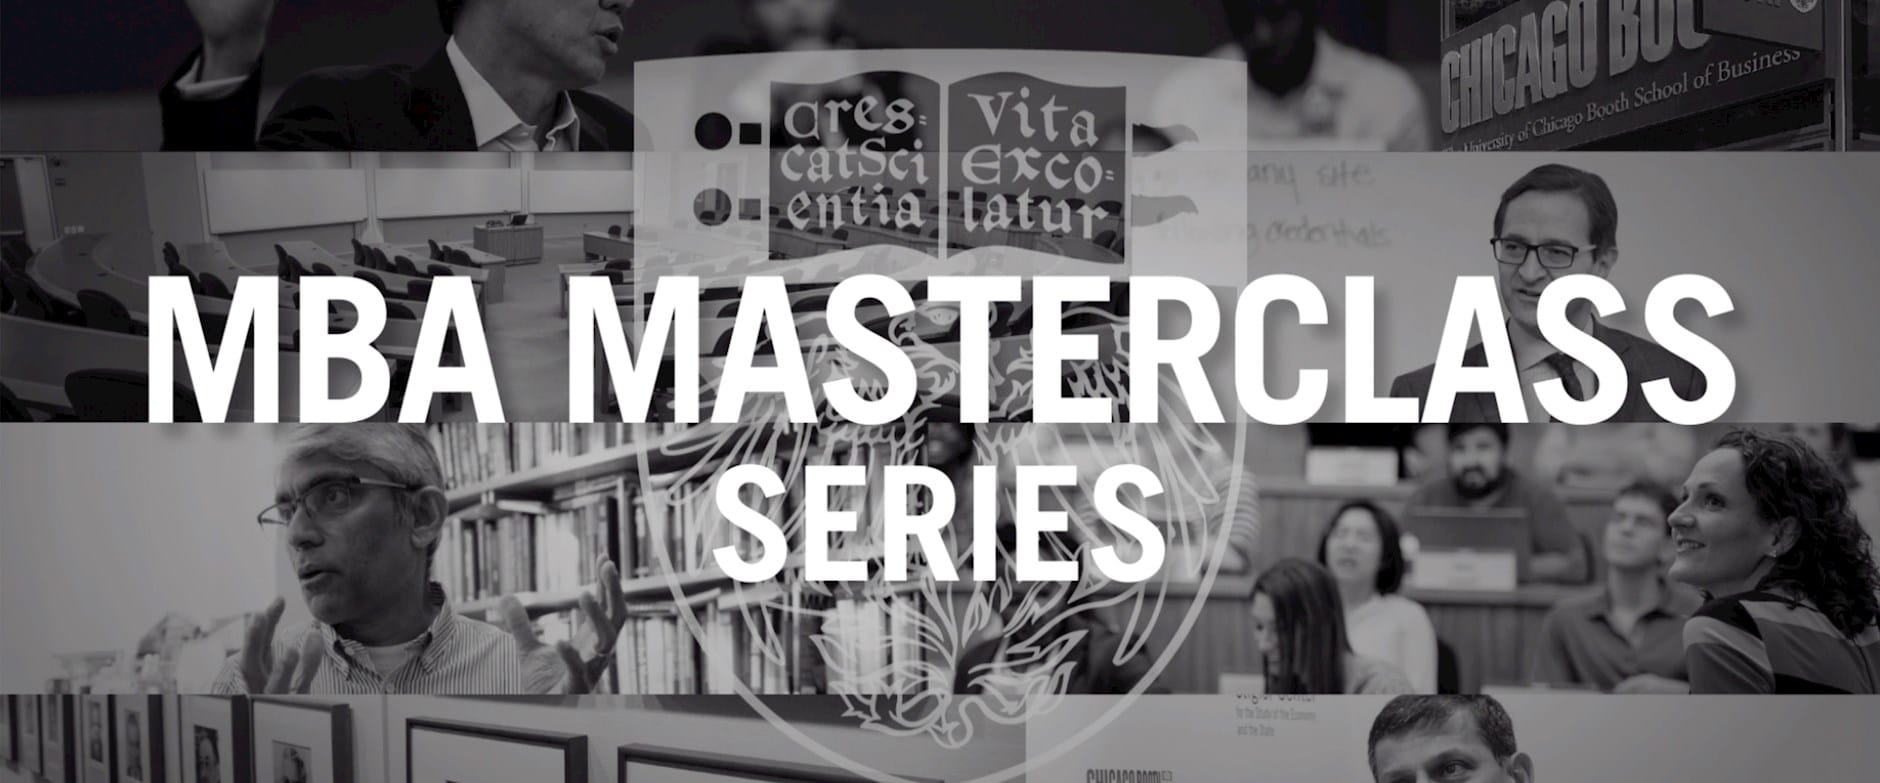 MBA Masterclass Series The University of Chicago Booth School of Business,  Master Class 